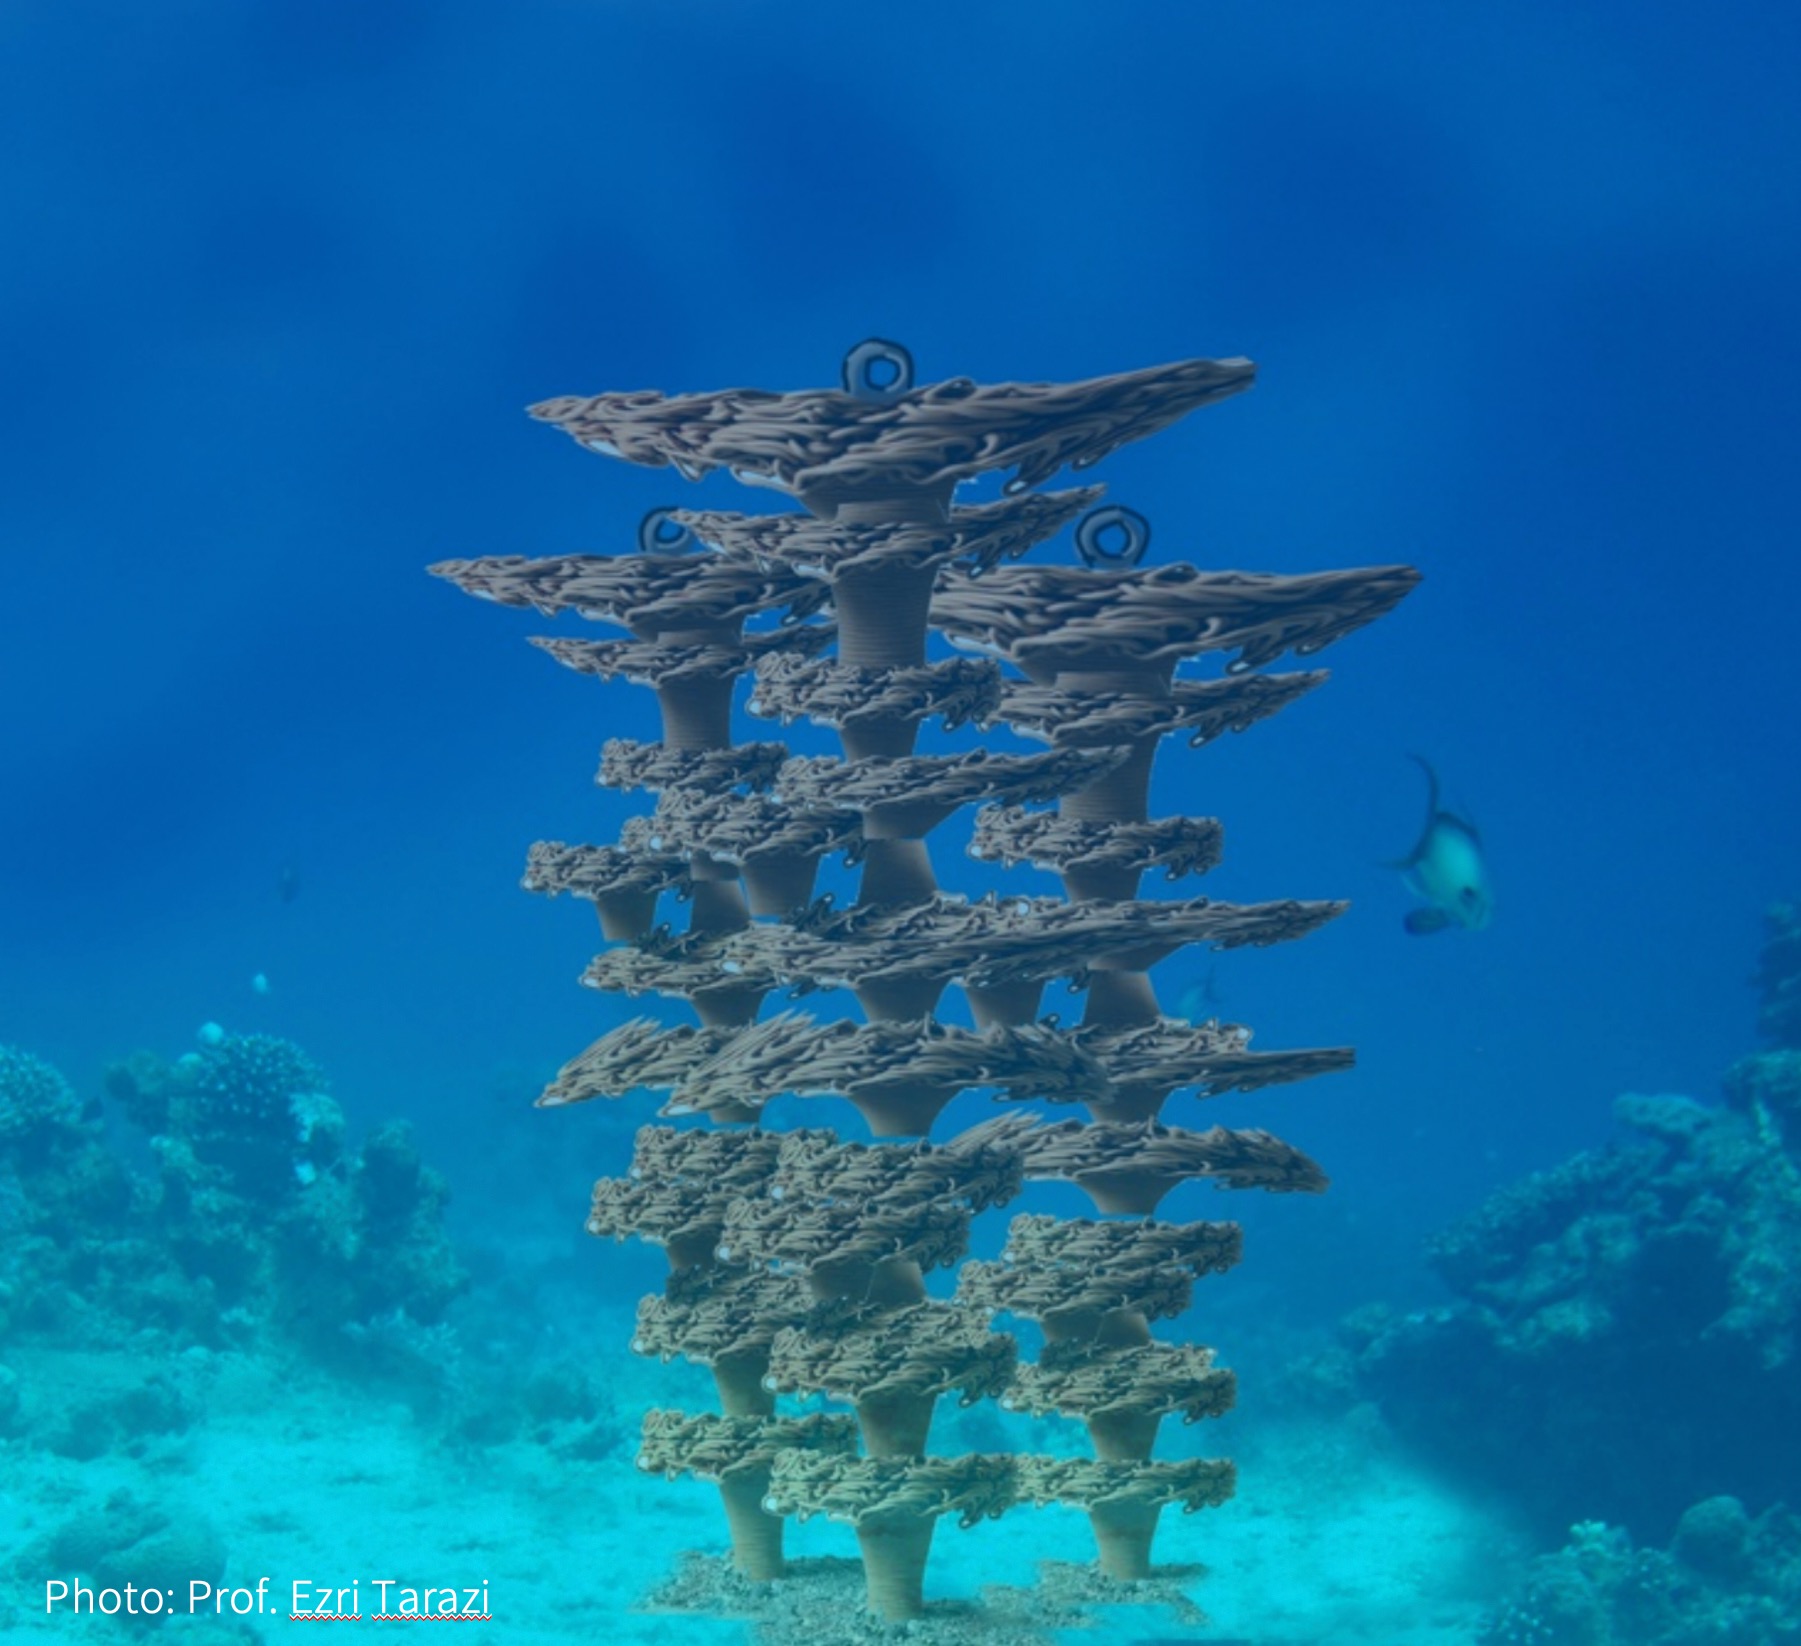 3D Printed Terra Cotta Tiles Create Artificial Reefs in the Red